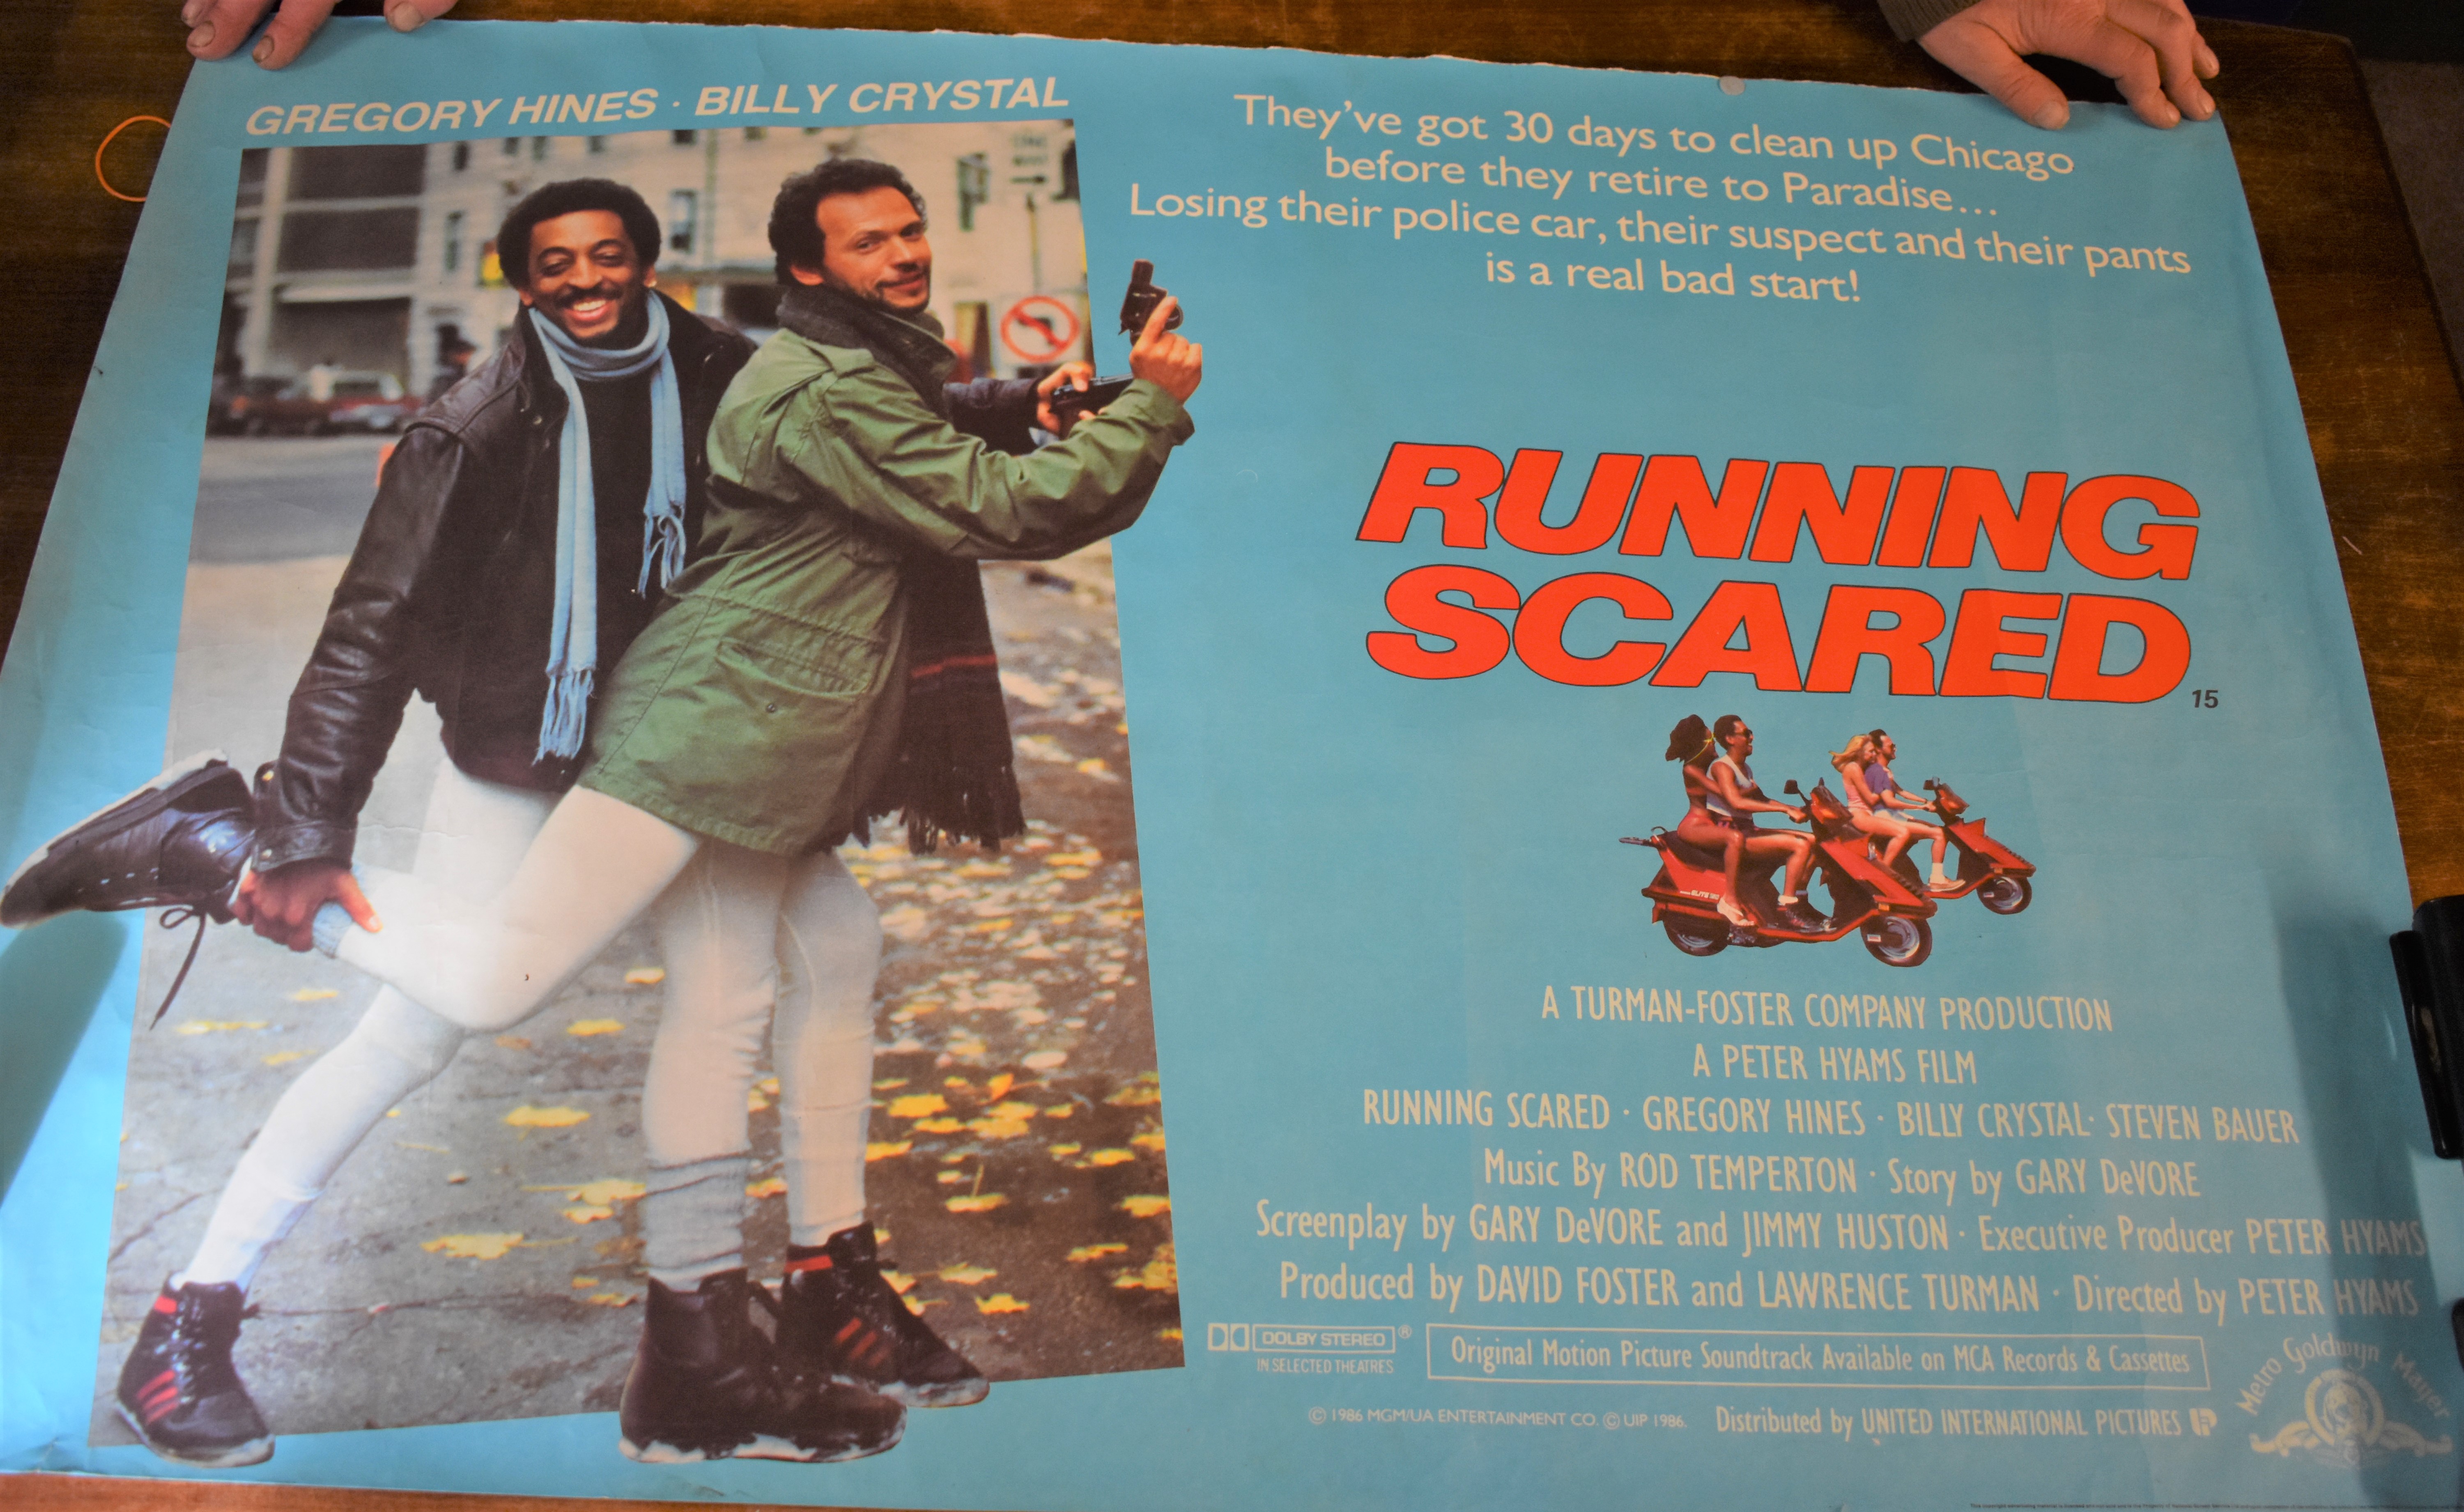 Running Scared - Cinematic Poster, starring Gregory Hines and Billy Crystal. Measures 100cm x 69cm